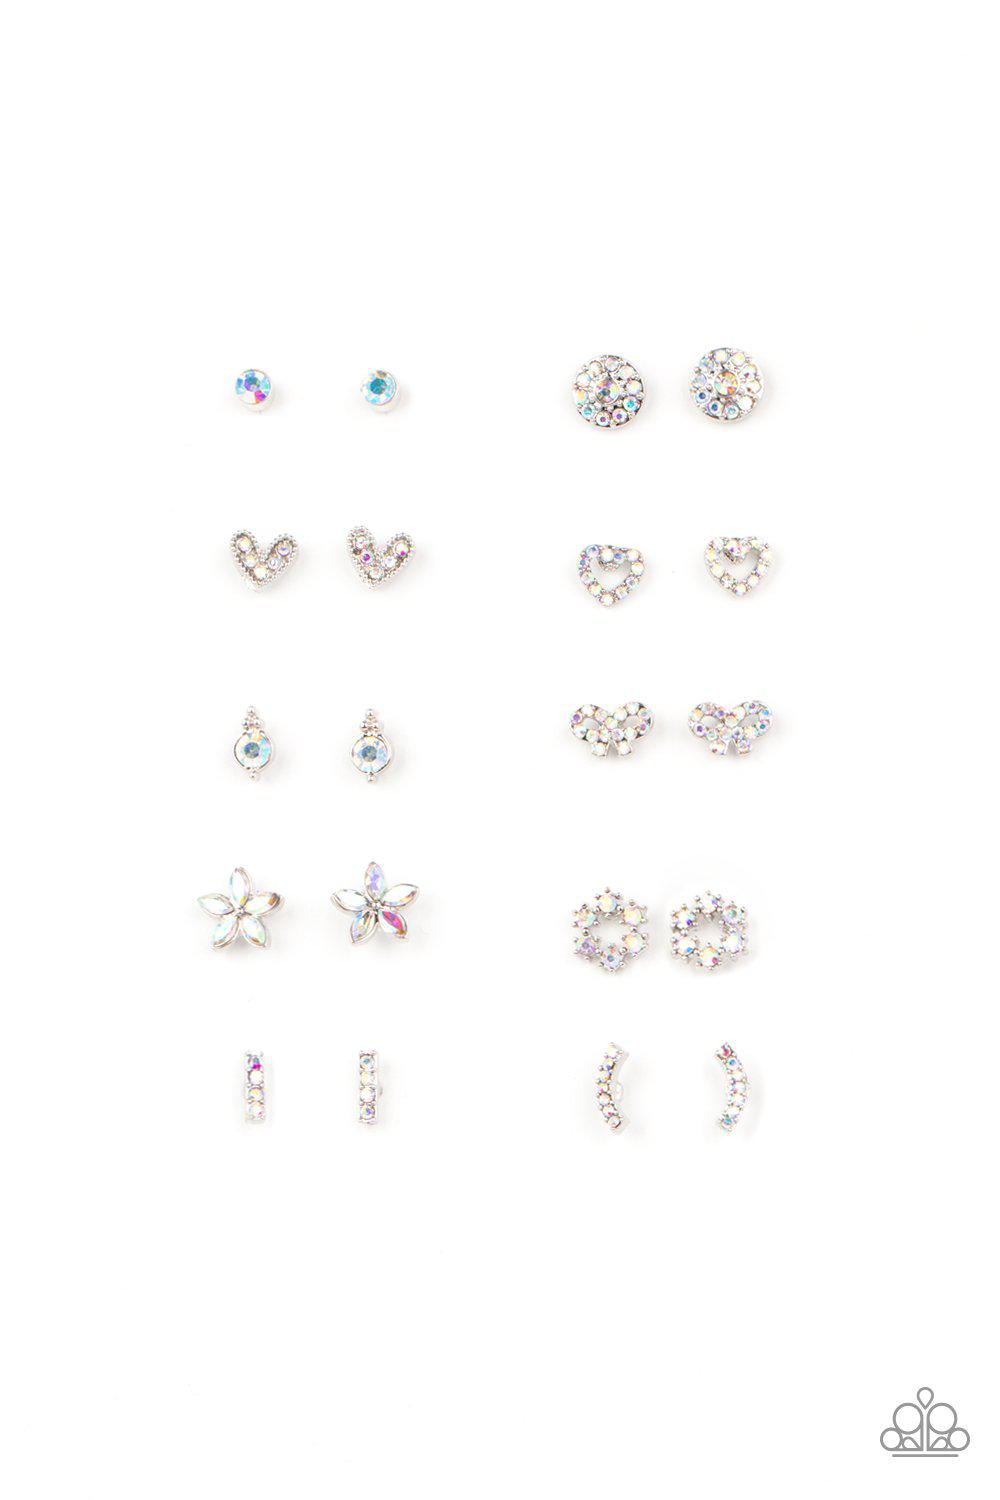 Starlet Shimmer Children&#39;s Iridescent Rhinestone Post Earrings v3 - Paparazzi Accessories (set of 10 pairs) - Full set -CarasShop.com - $5 Jewelry by Cara Jewels